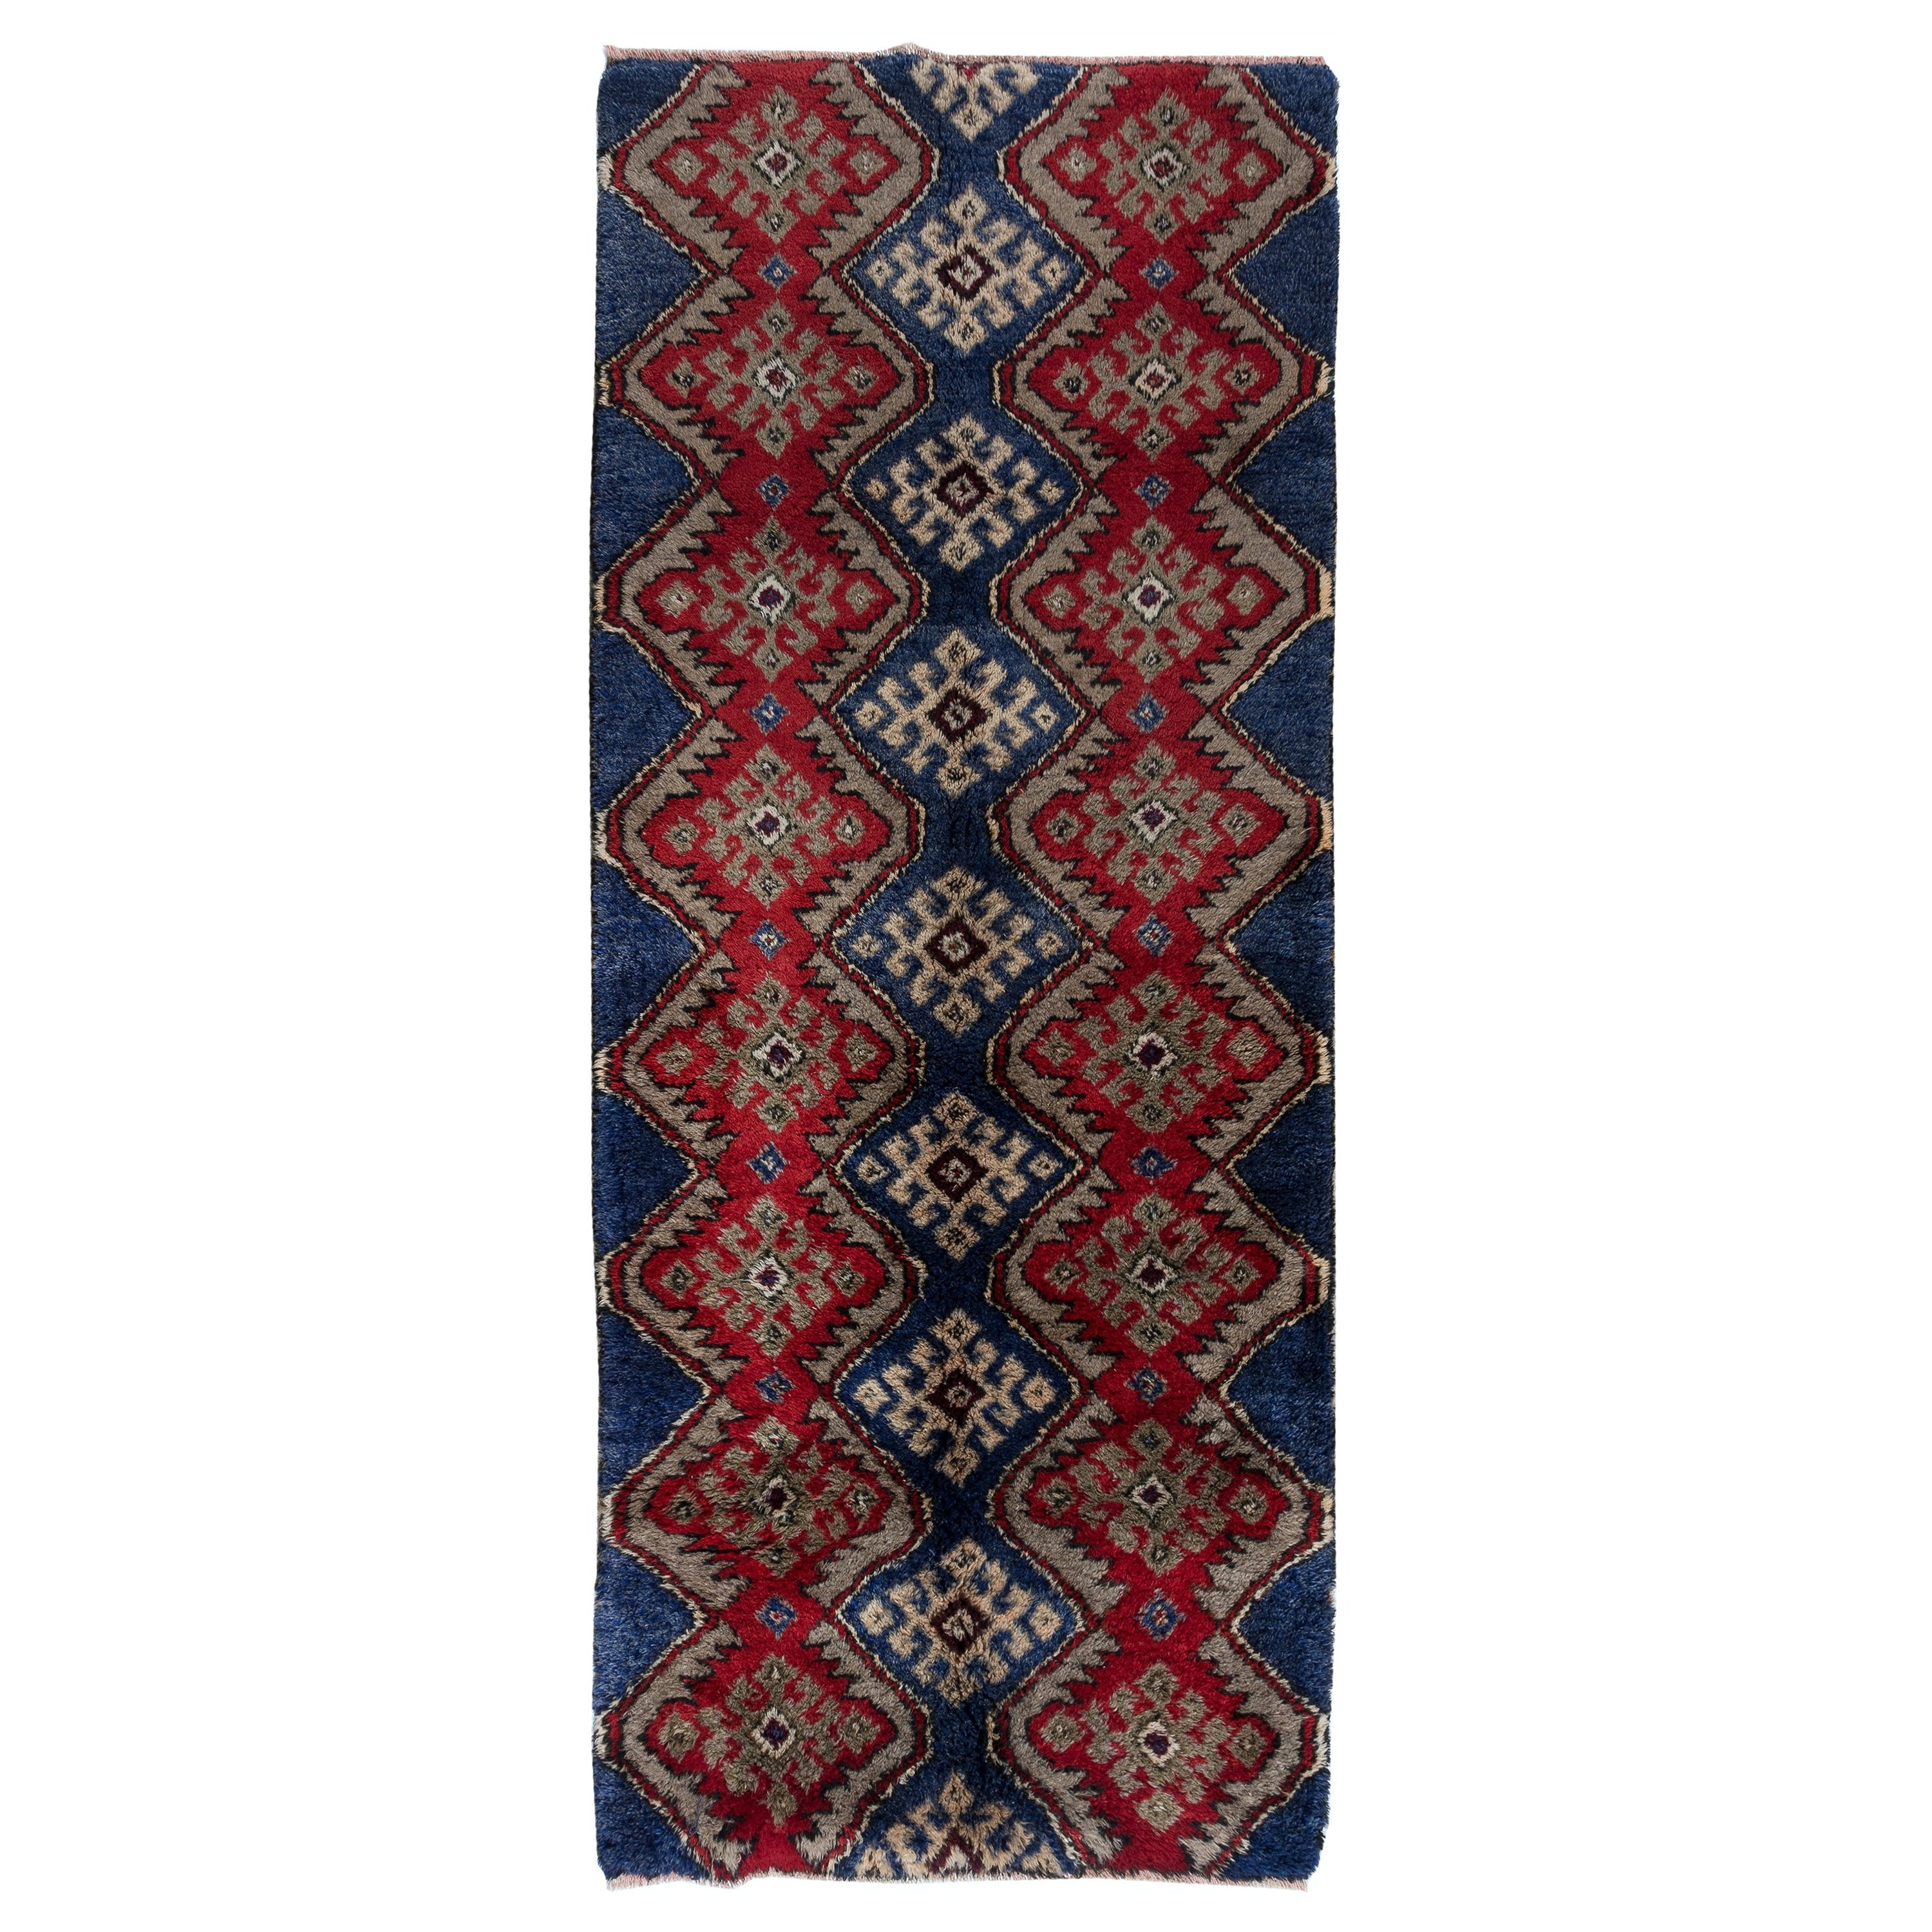 3.5x8.4 Ft Vintage Hand Knotted "Tulu" Teppich in Blau, Rot & Light Brown. 100% Wolle